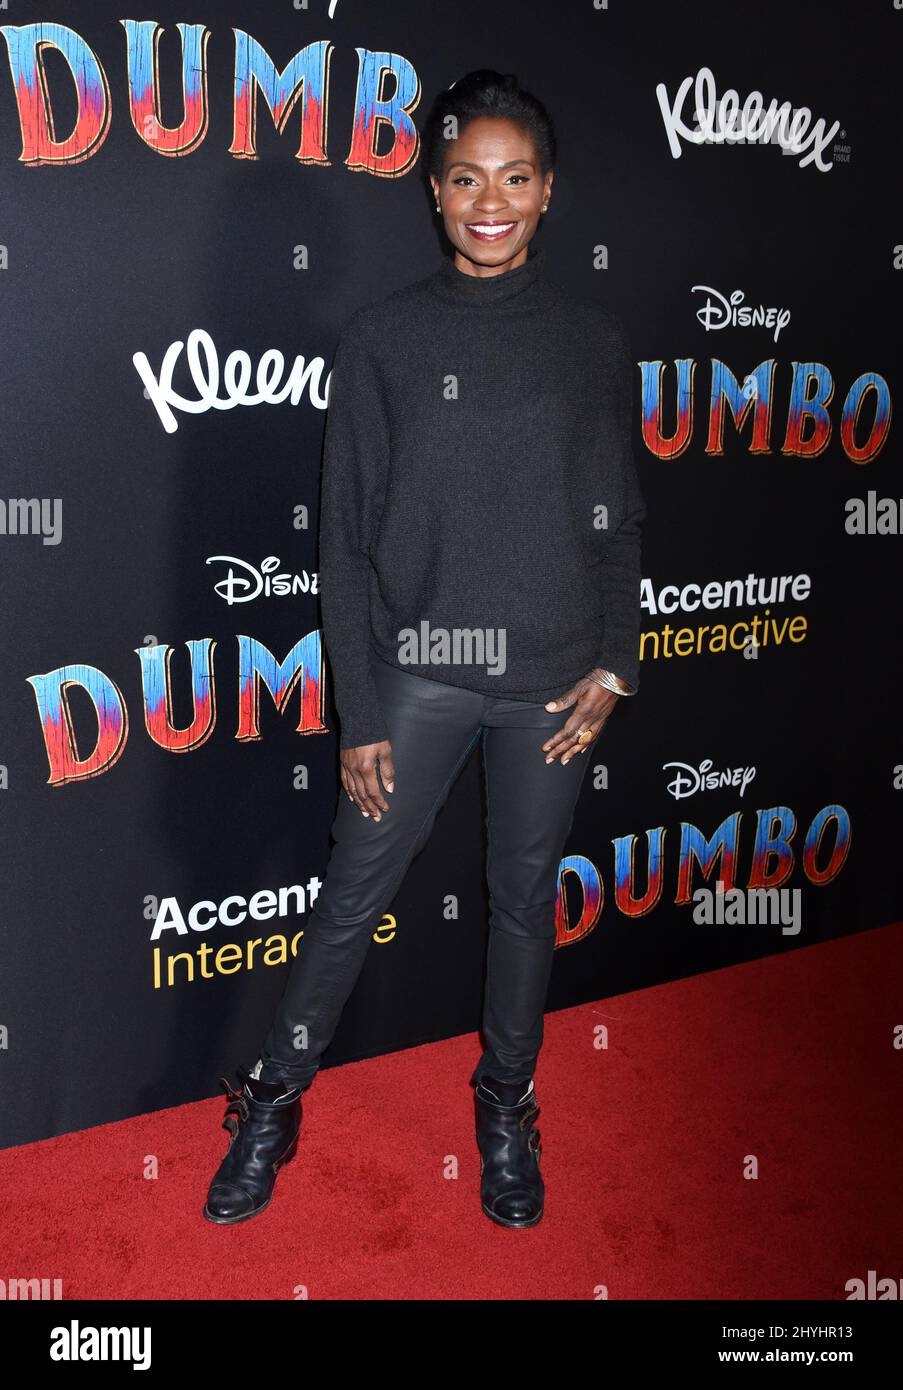 Adina Porter arriving for Disney's premiere of 'Dumbo' held at the El Capitan Theatre on March 11, 2019 in Hollywood, Los Angeles. Stock Photo